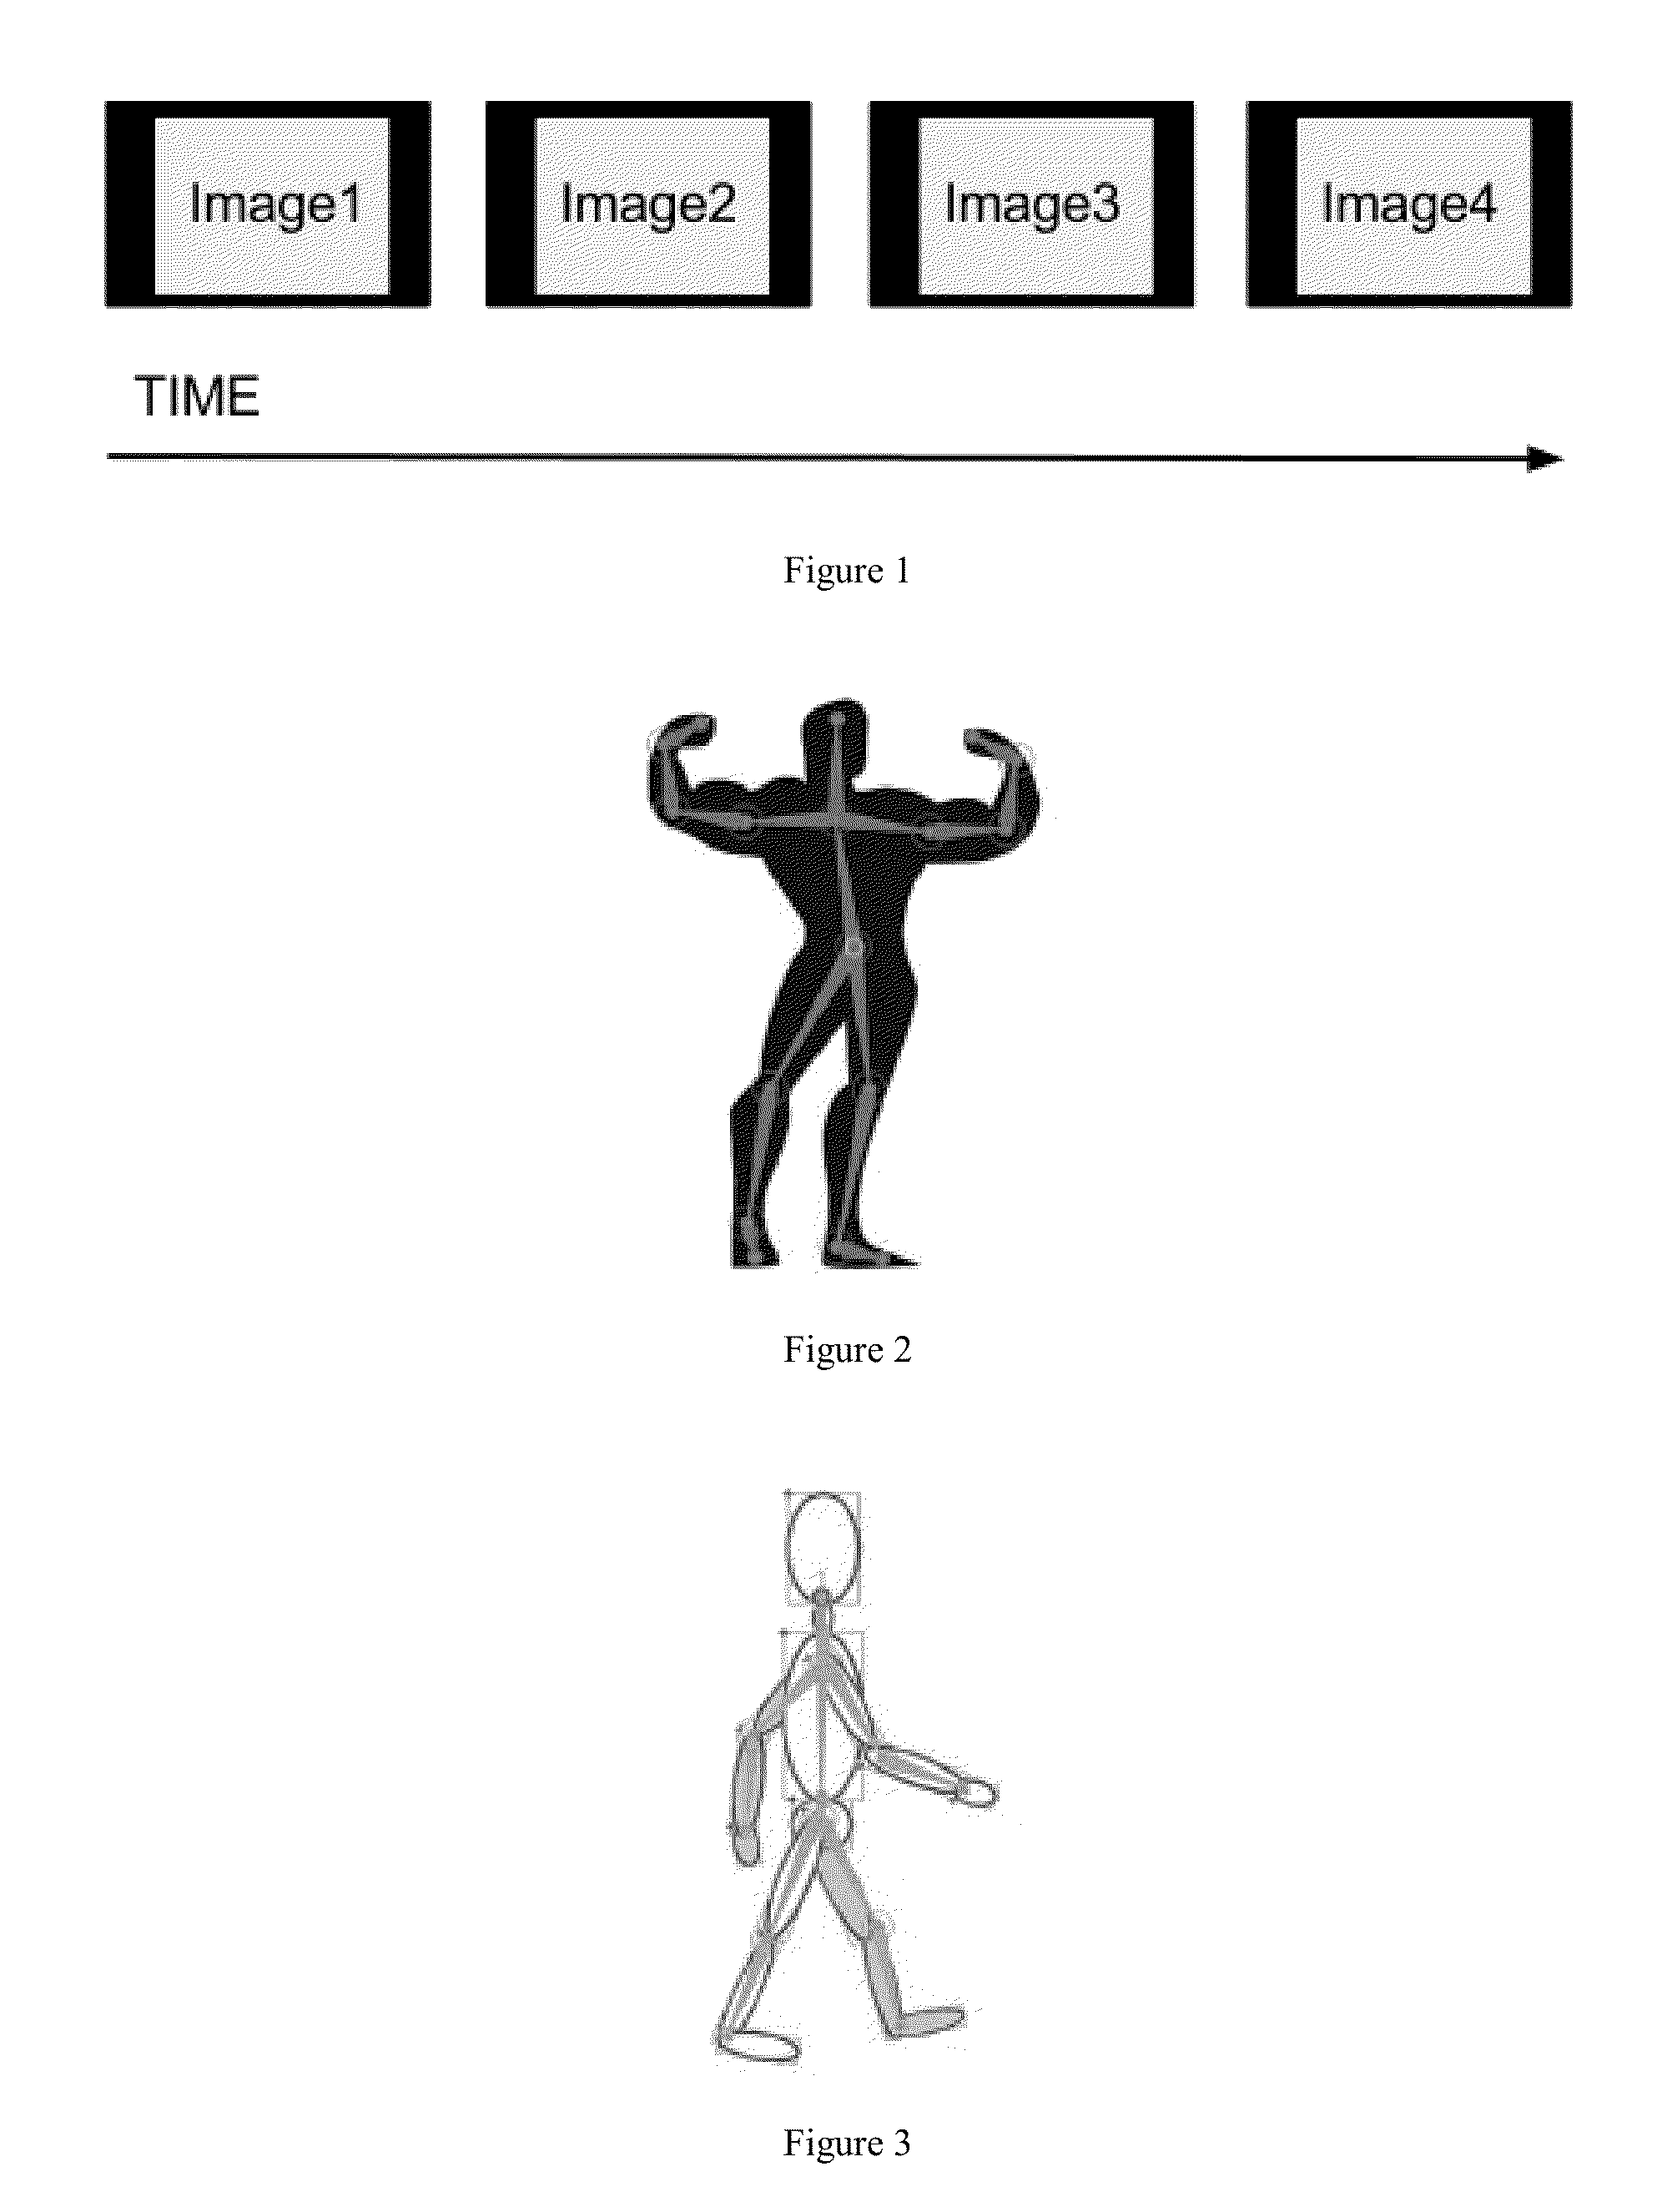 Systems and Methods for Displaying Animations on a Mobile Device